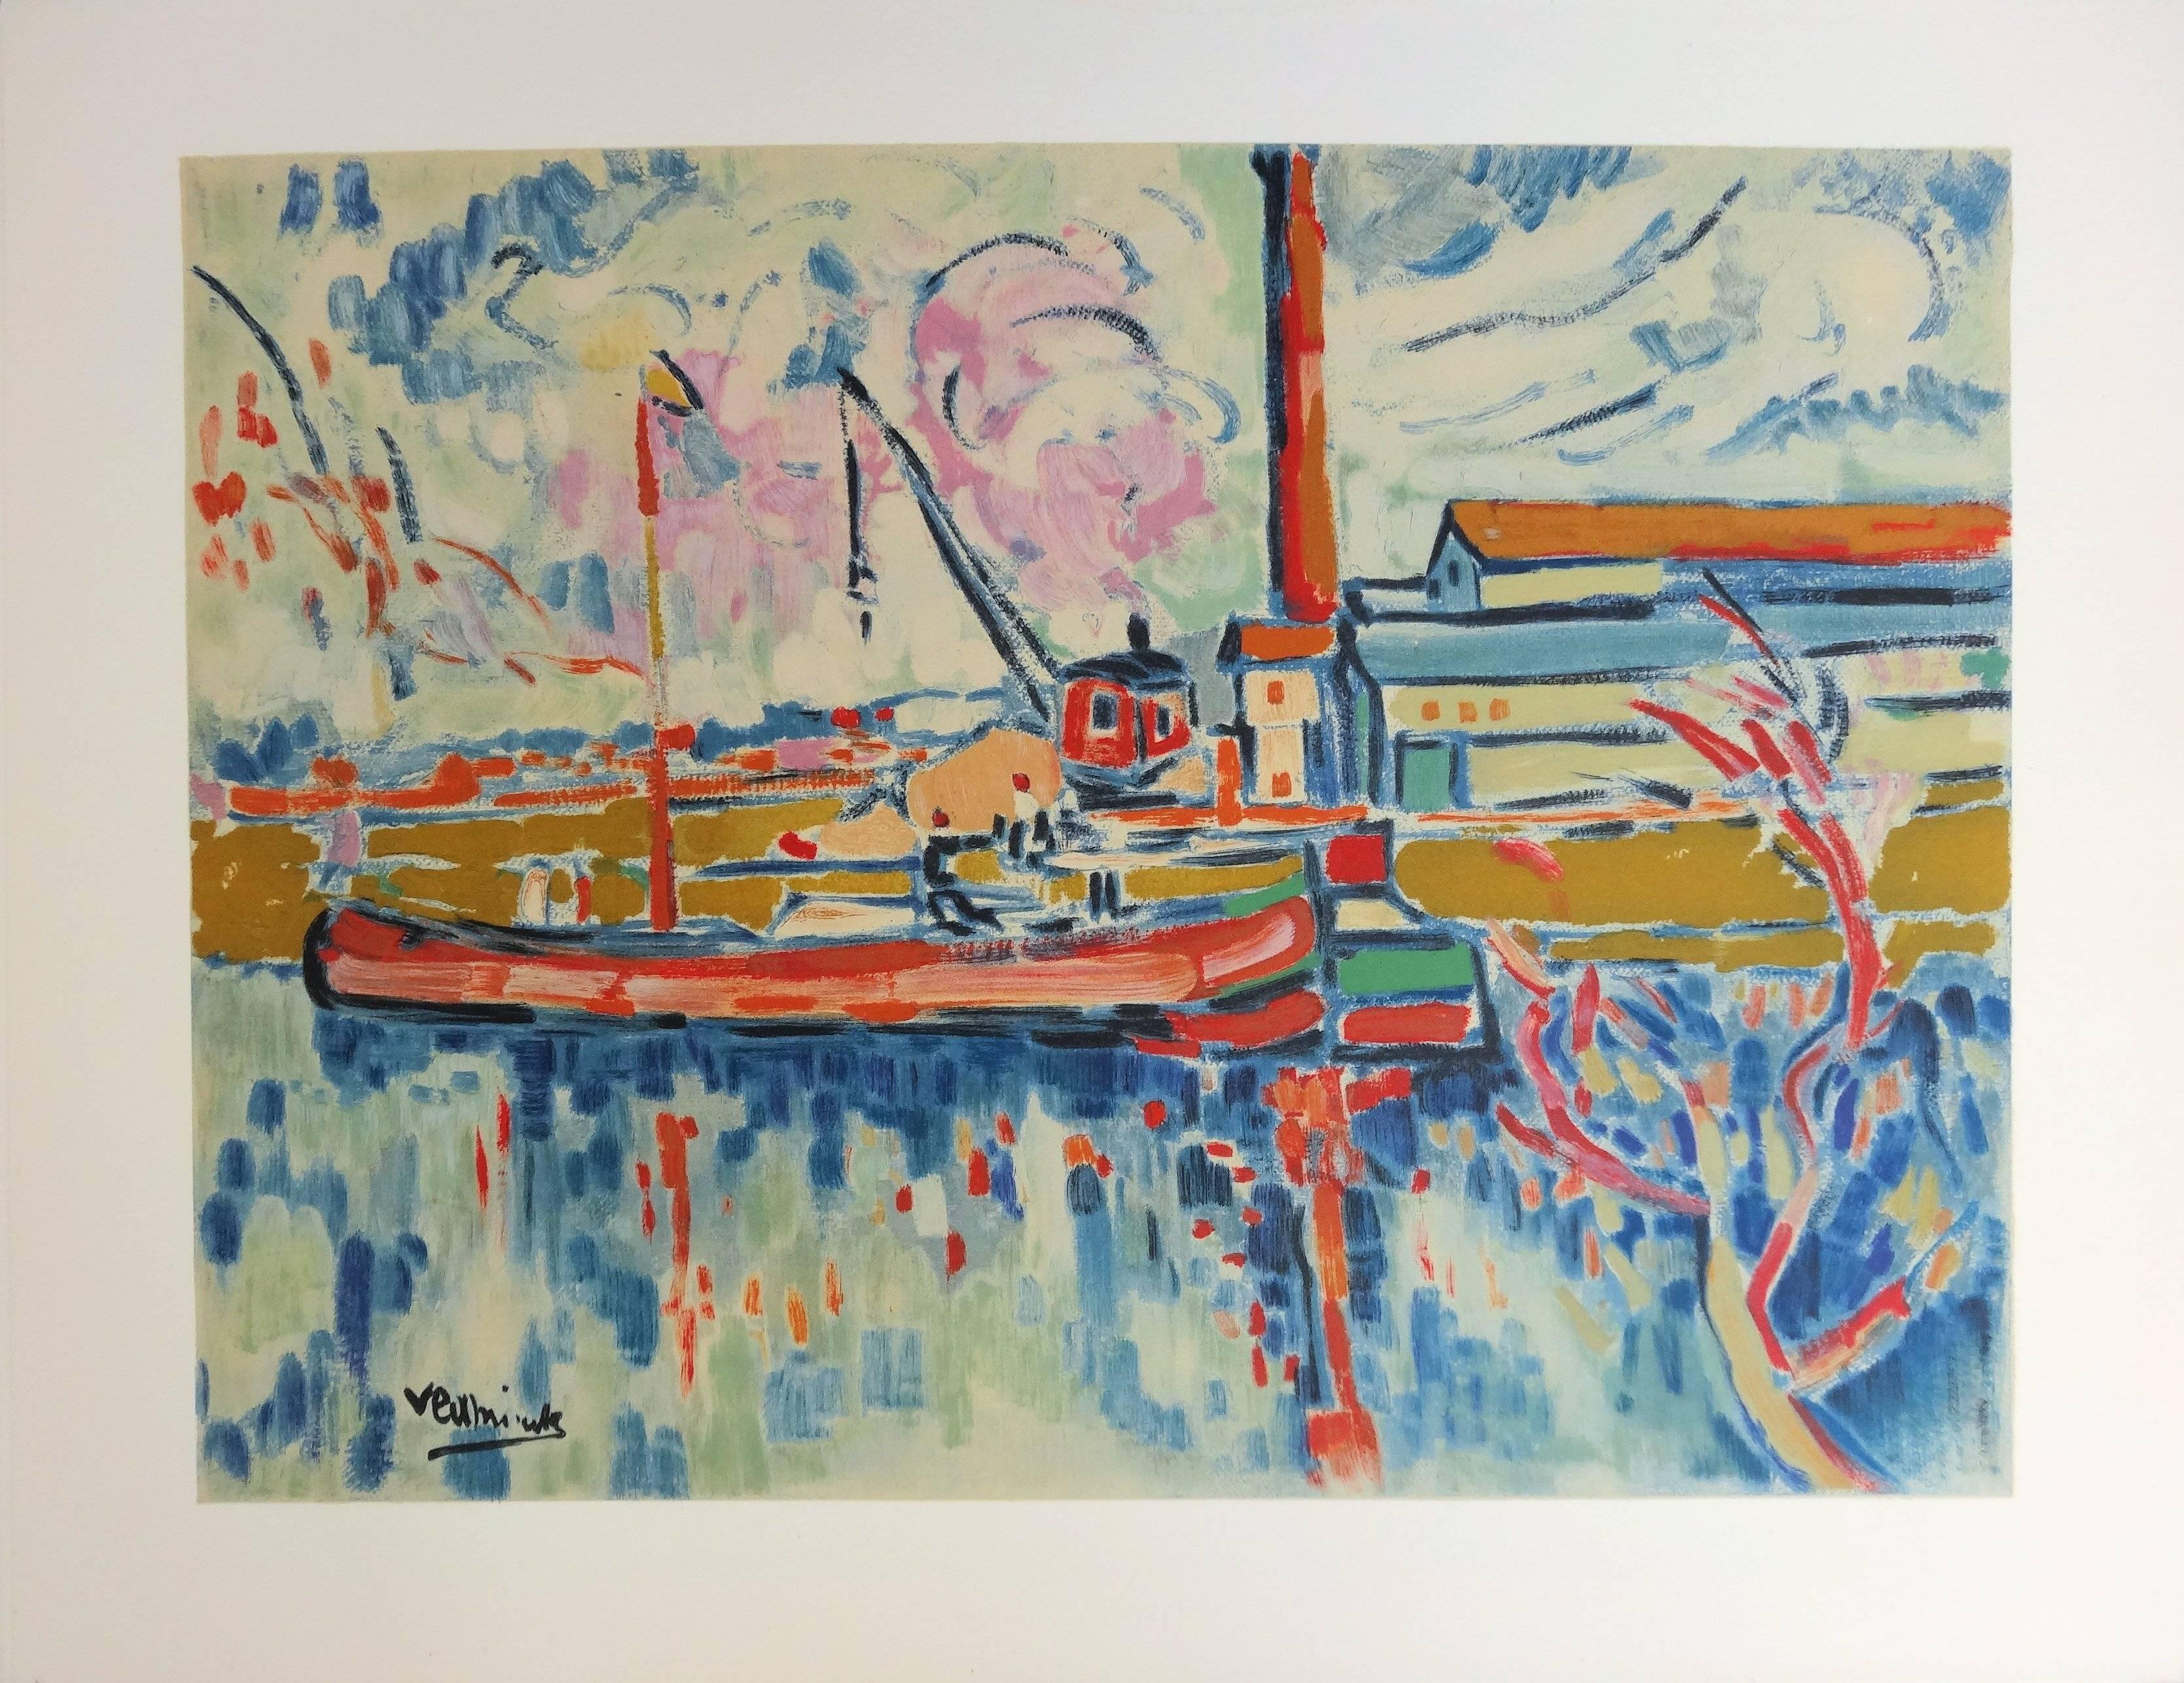 (after) Maurice de Vlaminck Landscape Print - Seine River and Boat in Chatou - Lithograph, 1972